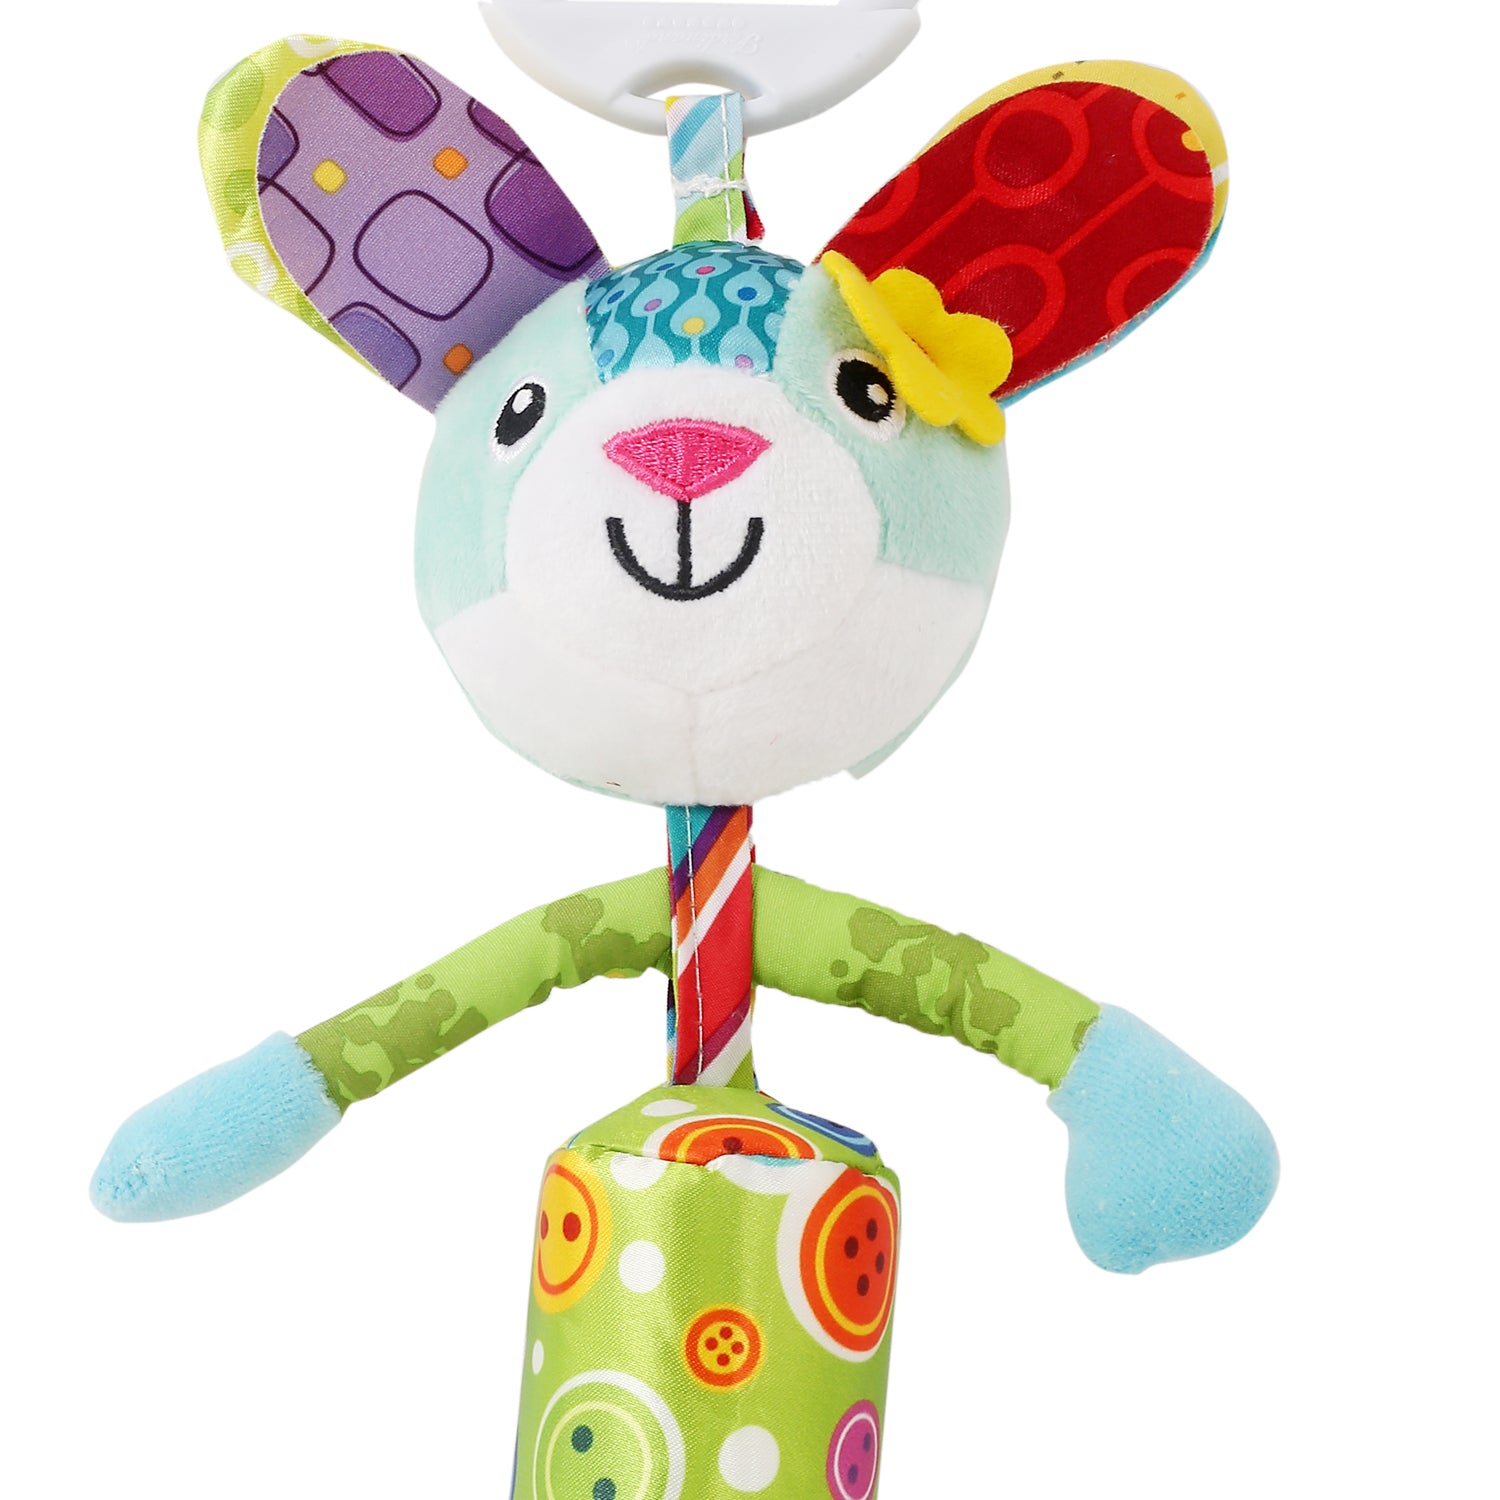 Mr. Flourist Green Hanging Musical Toy / Wind Chime Soft Rattle